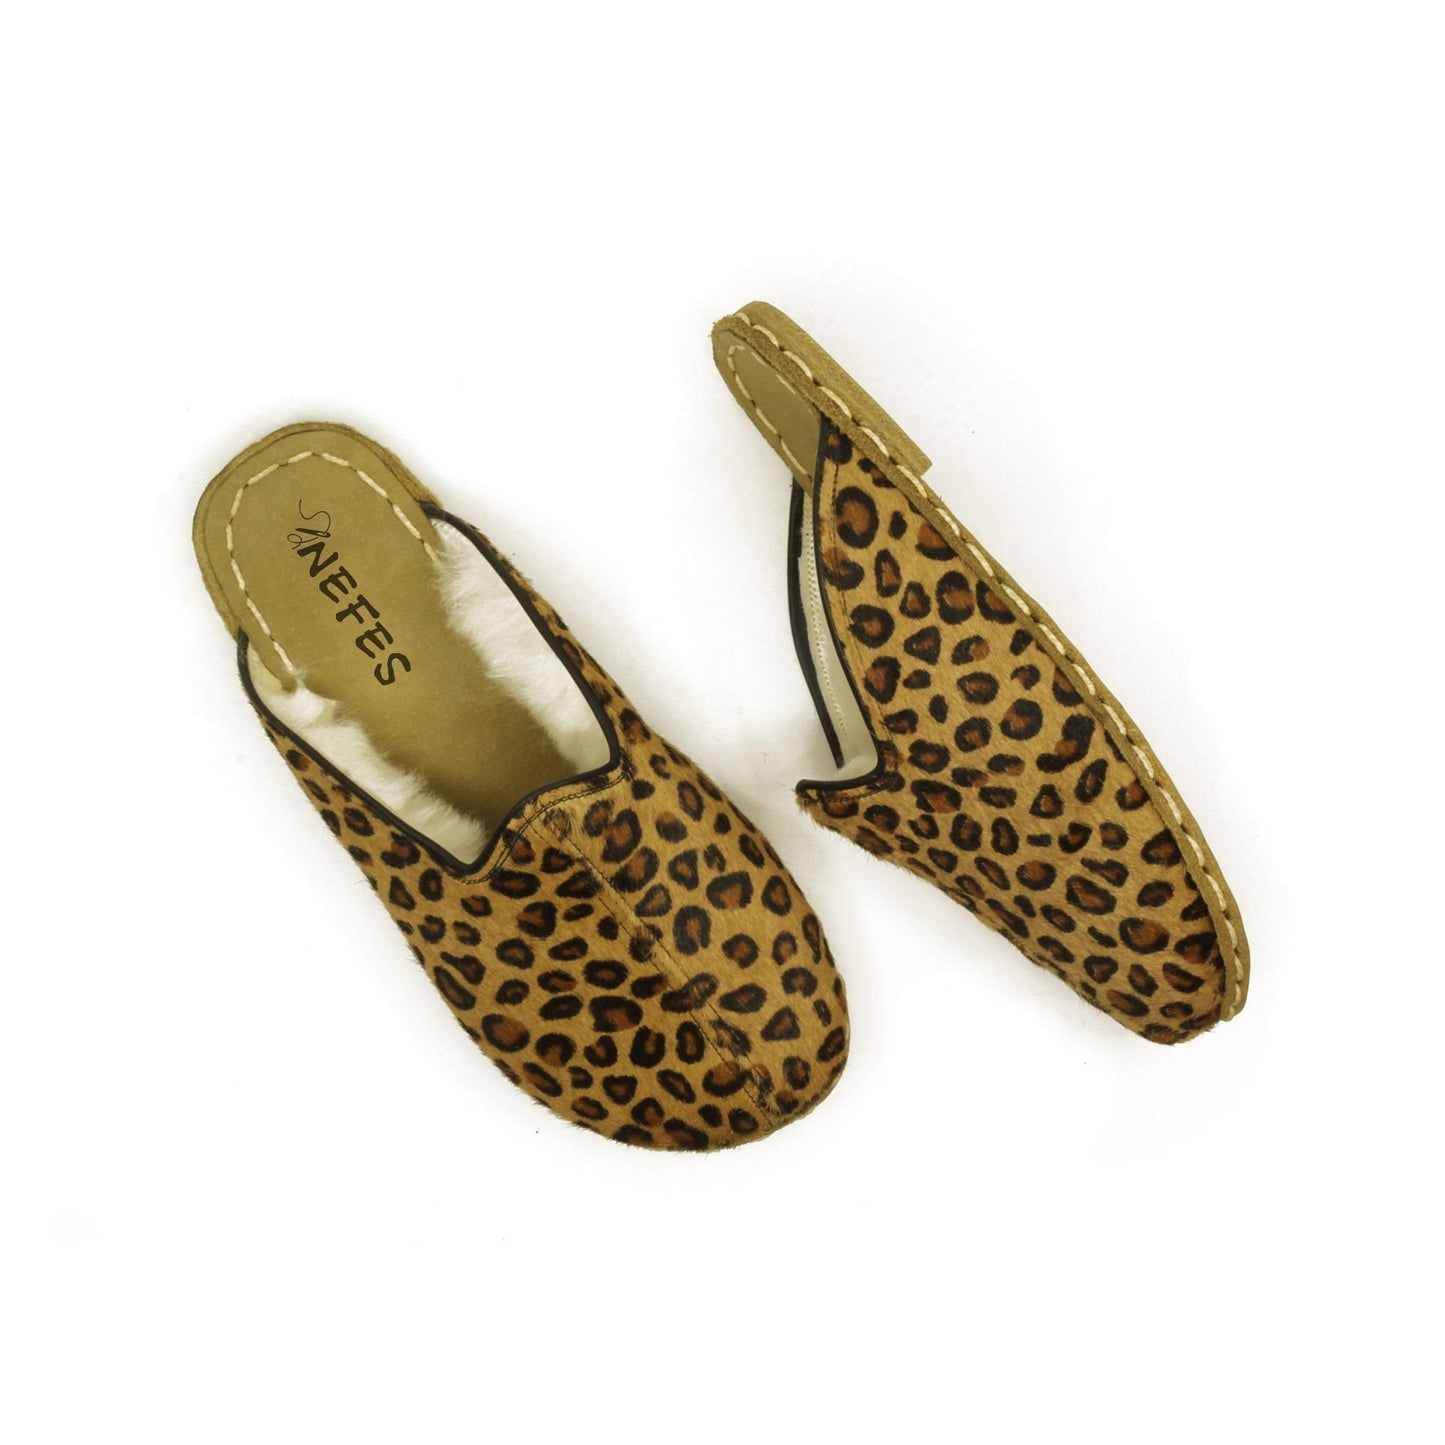 Womens Leopard Moccasin Fur Slippers - Nefes Shoes